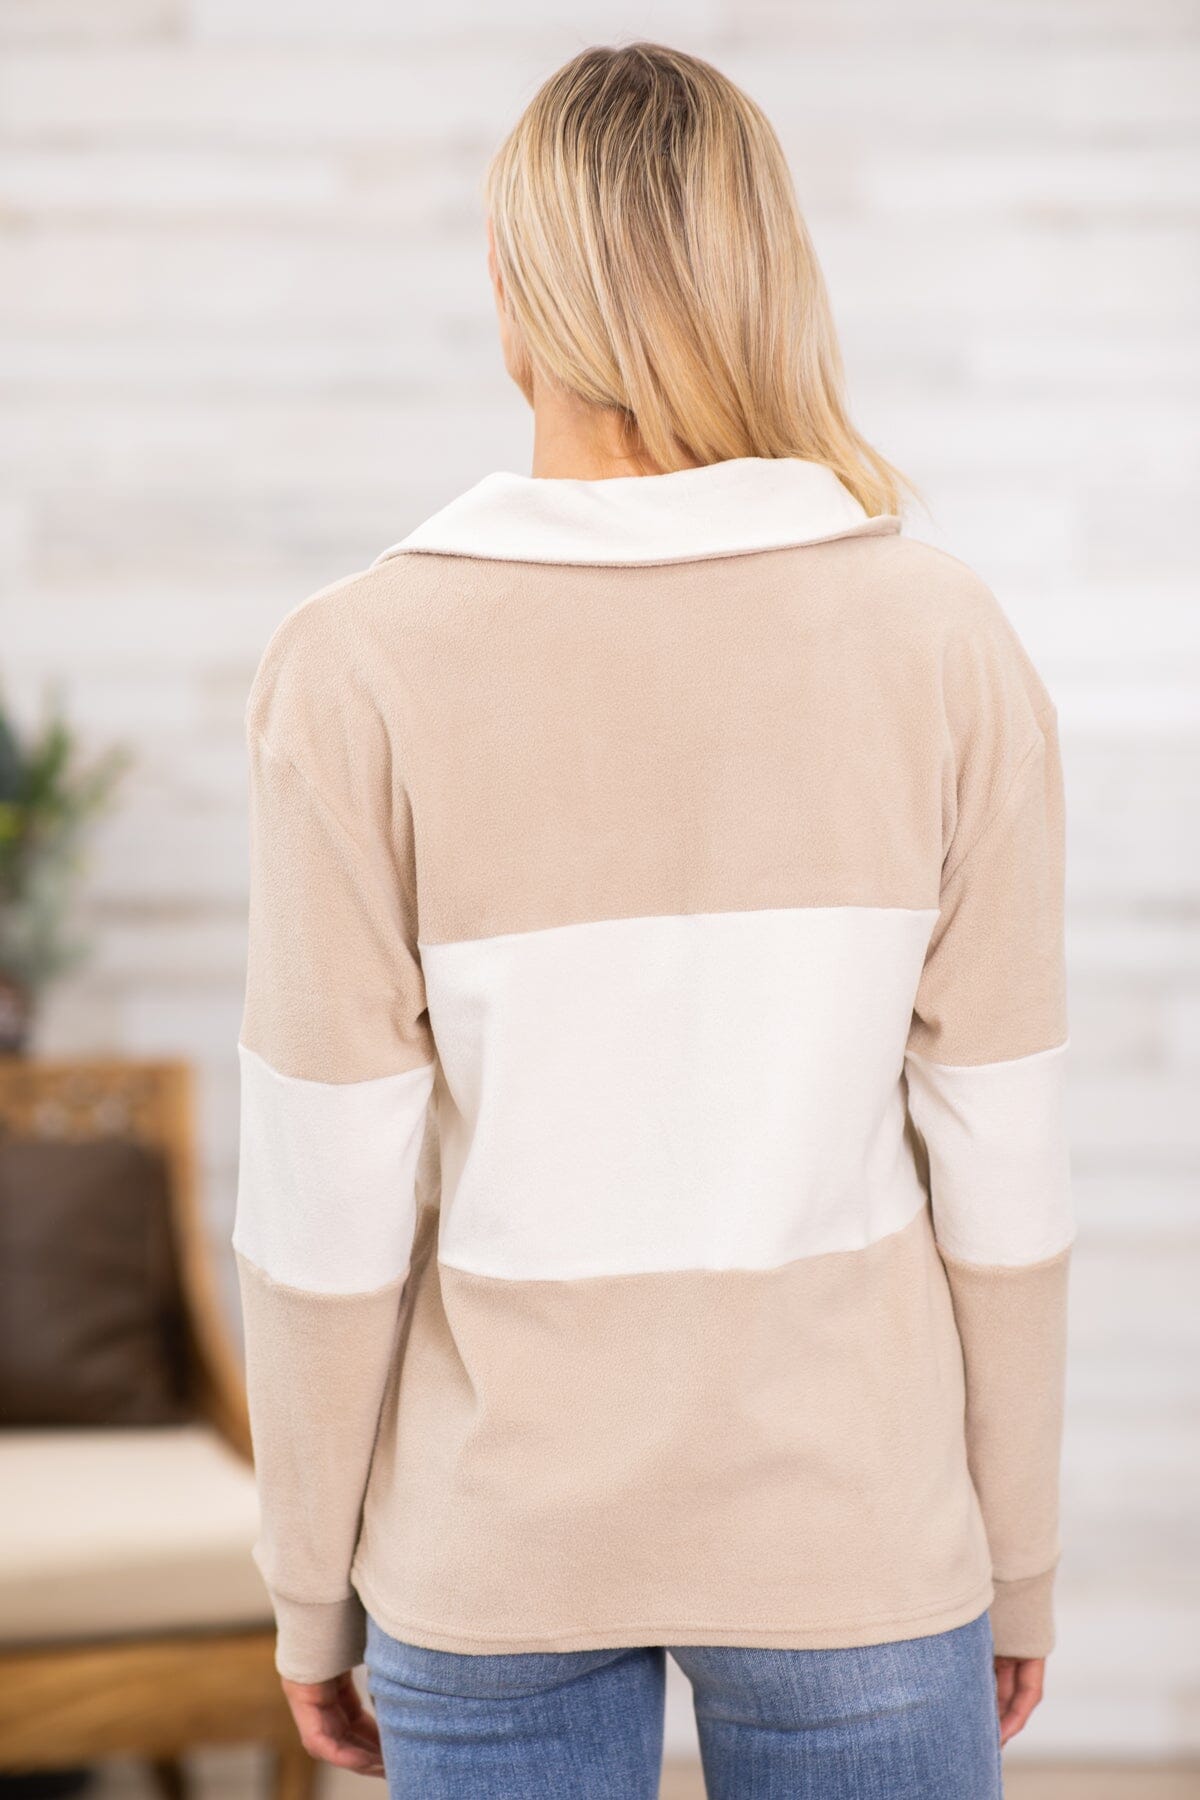 Tan and Off White Colorblock 1/4 Zip Pullover - Filly Flair